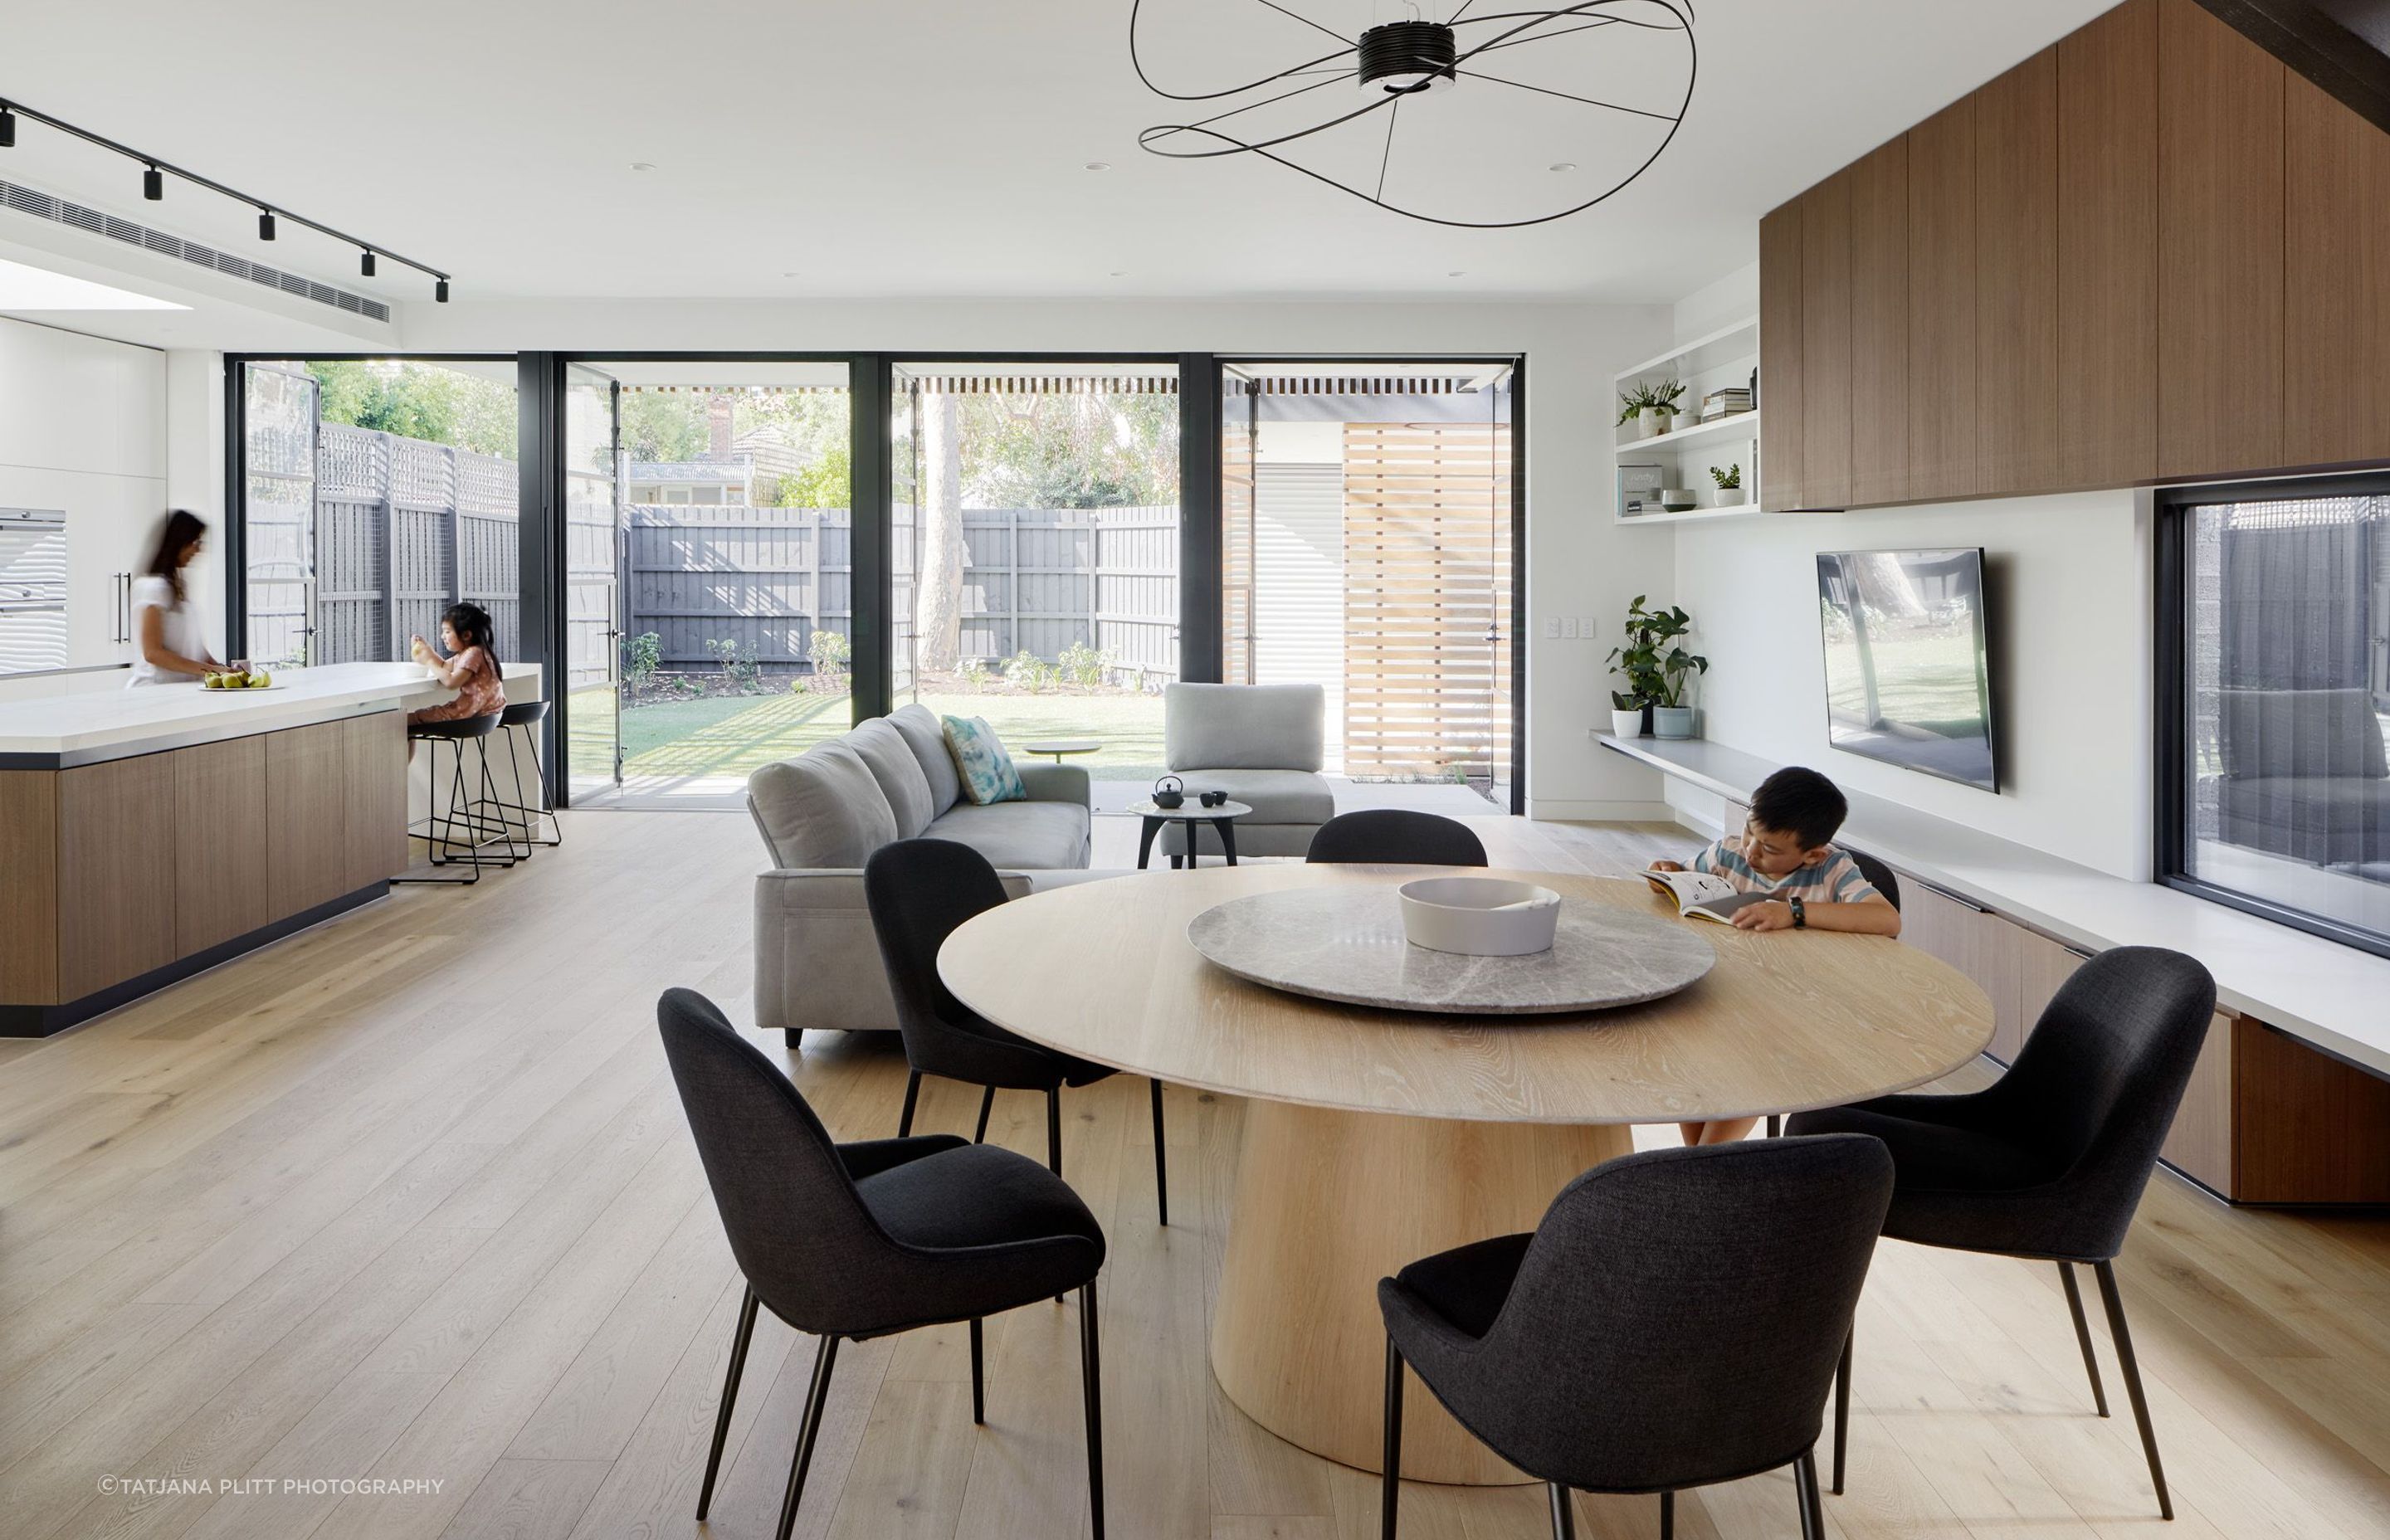 "They wanted a new kitchen, living and dining area so the family could gather – somewhere to spend most of their time," says Chan.